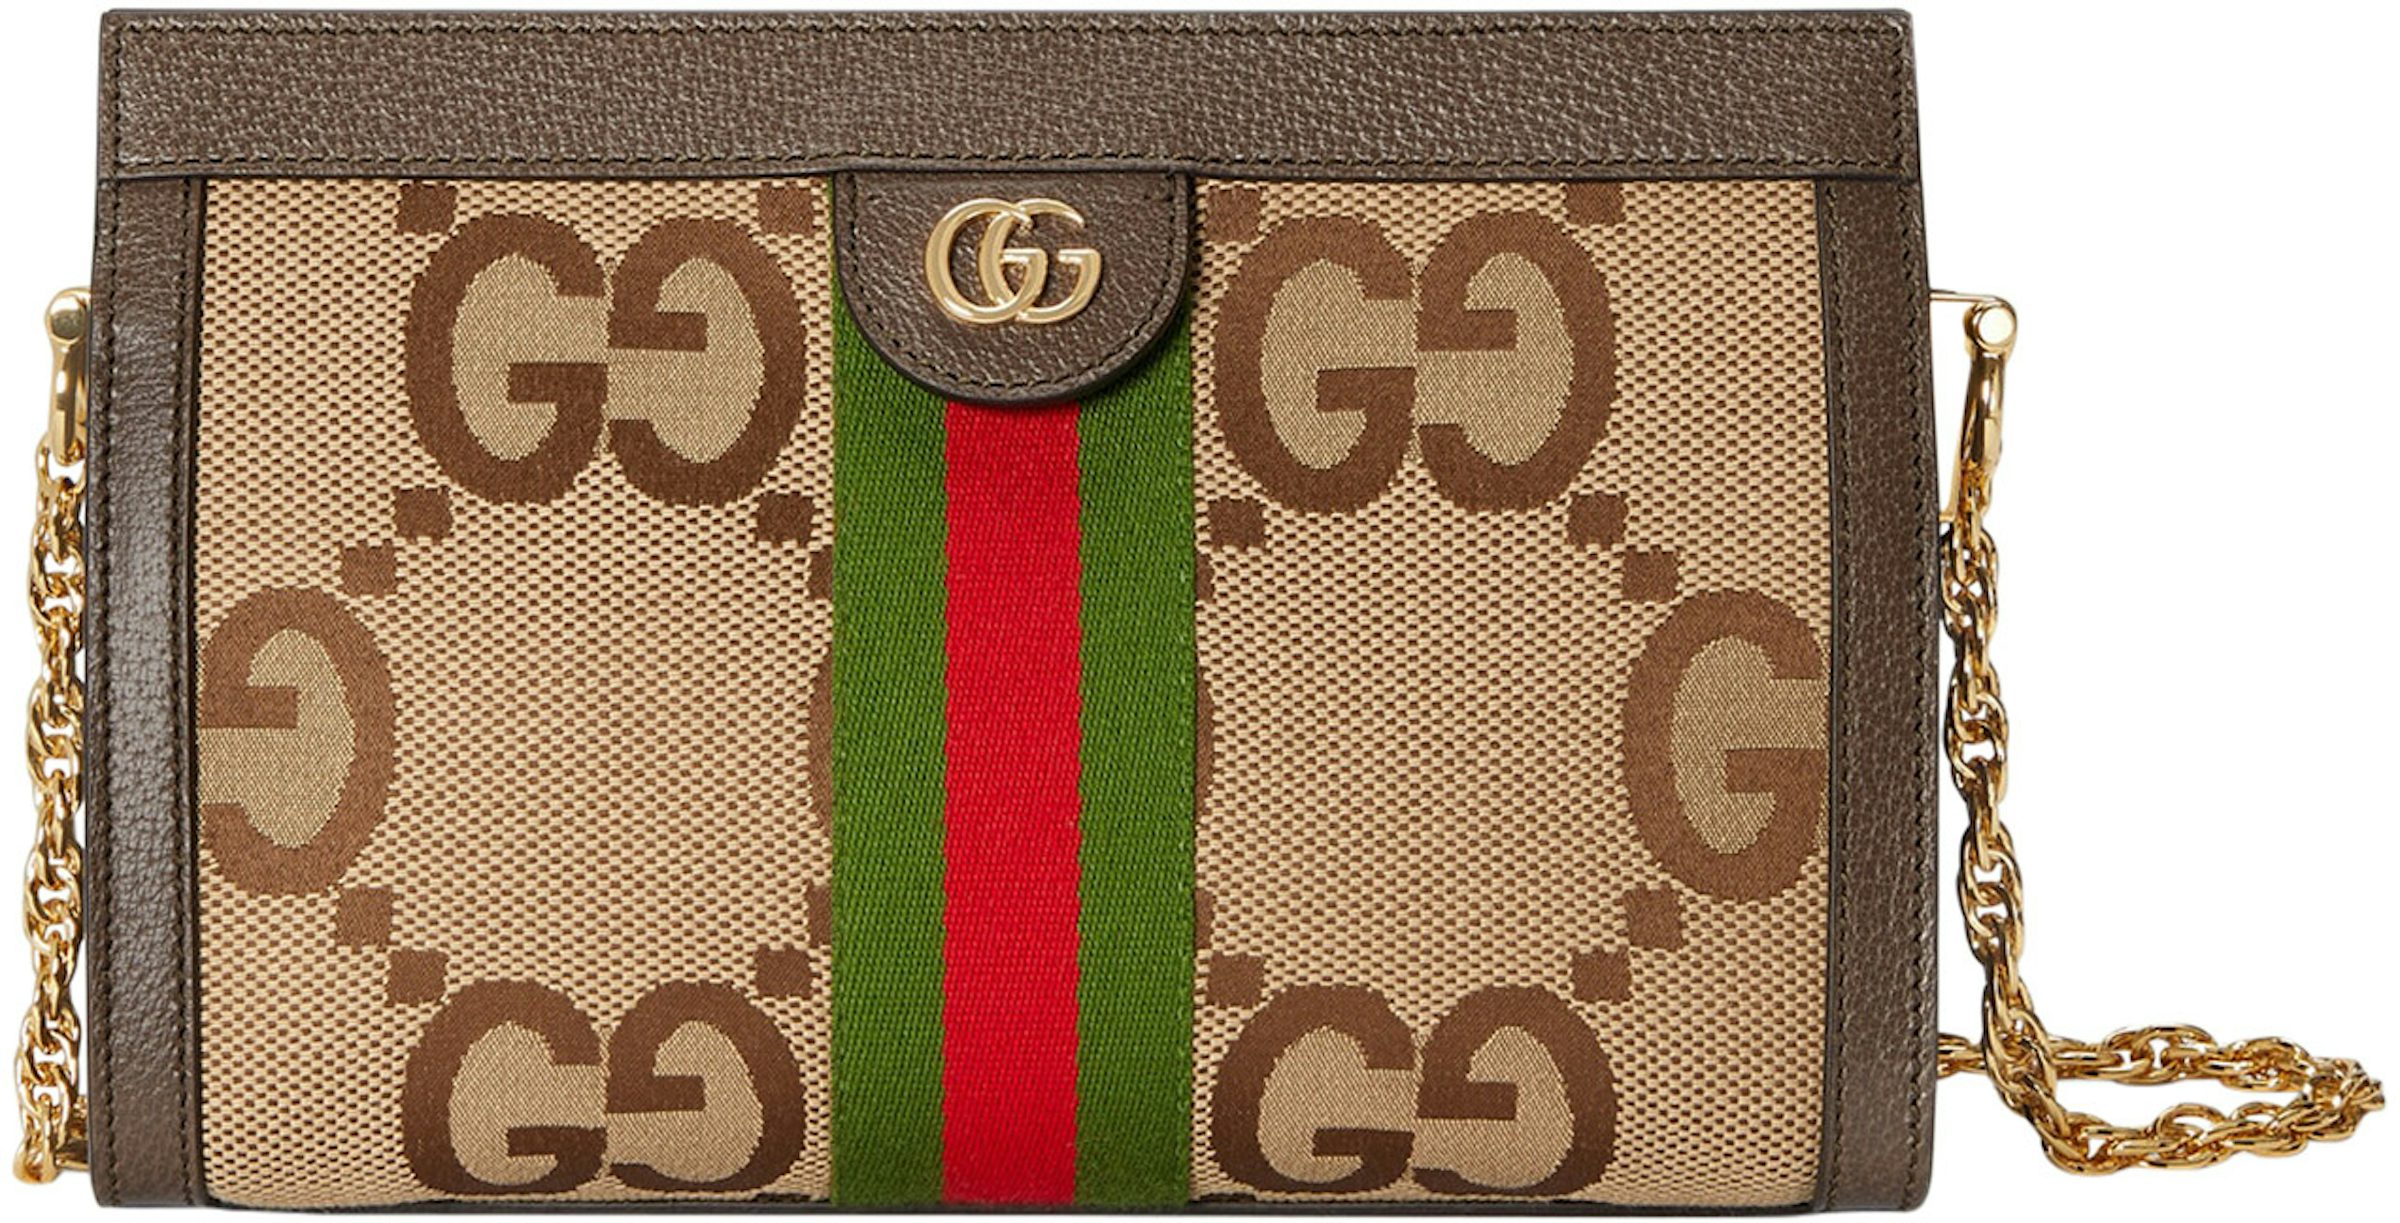 Auth GUCCI Ophidia GG Small Shoulder Bag 503877 Beige Green Red